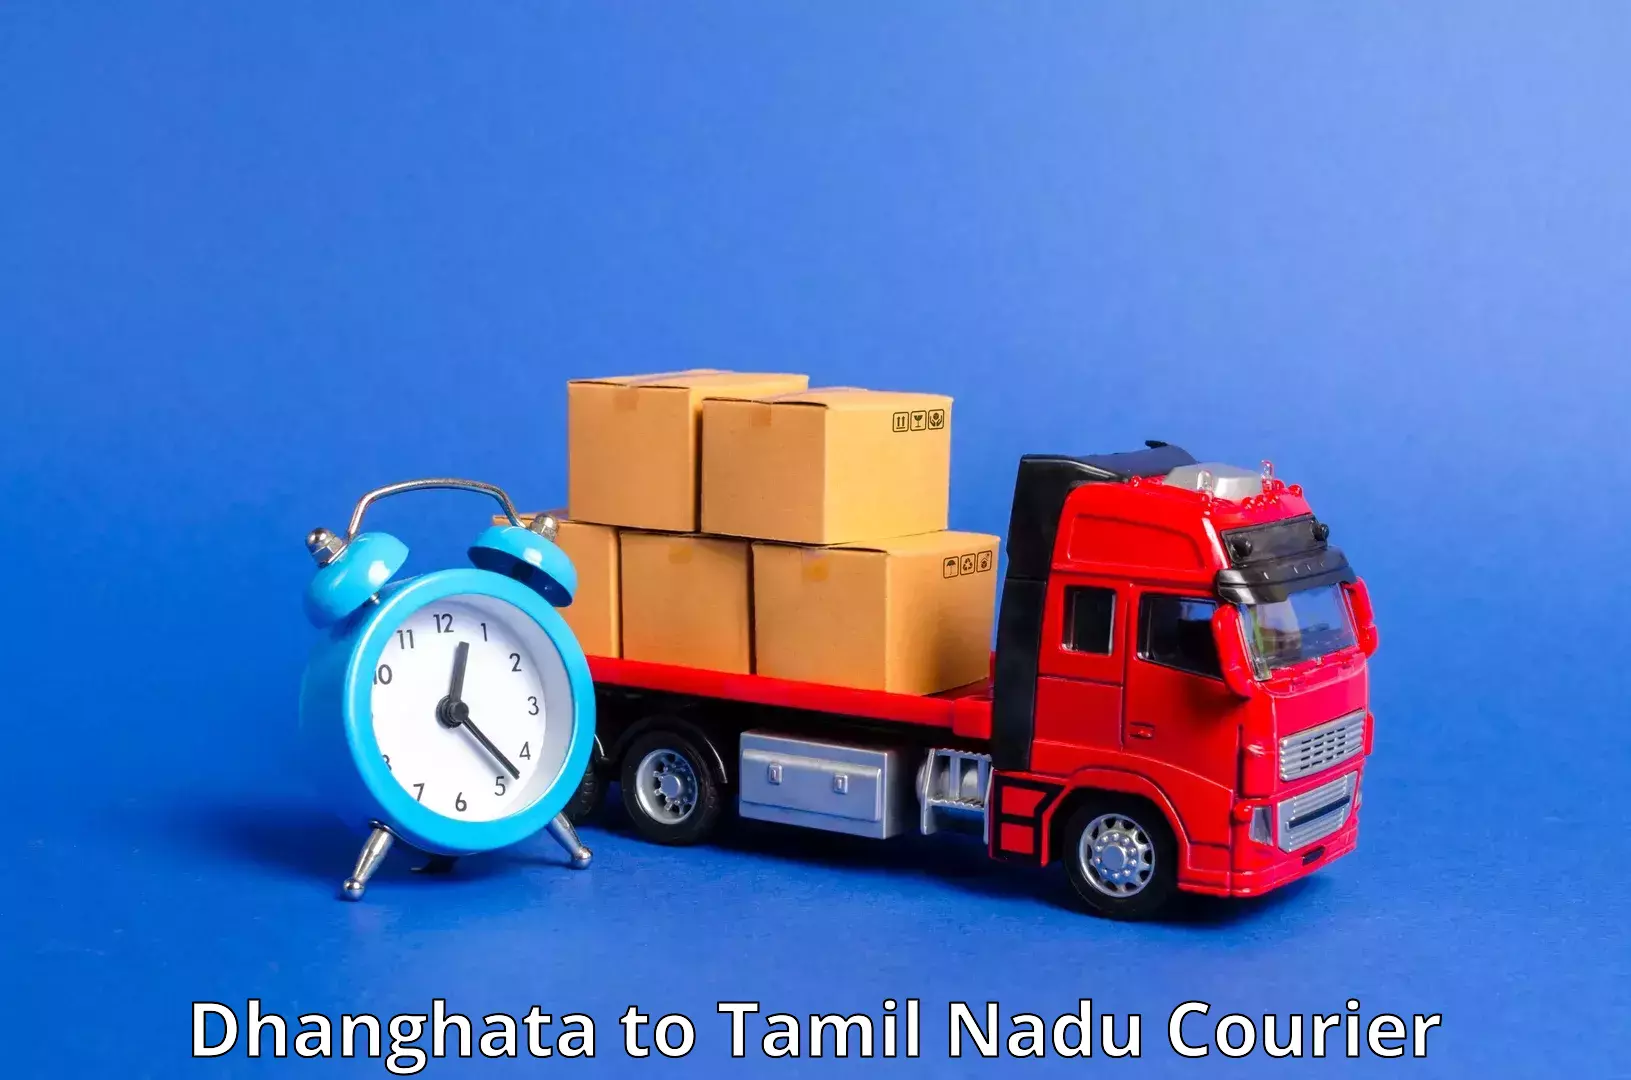 High-capacity parcel service Dhanghata to IIT Madras